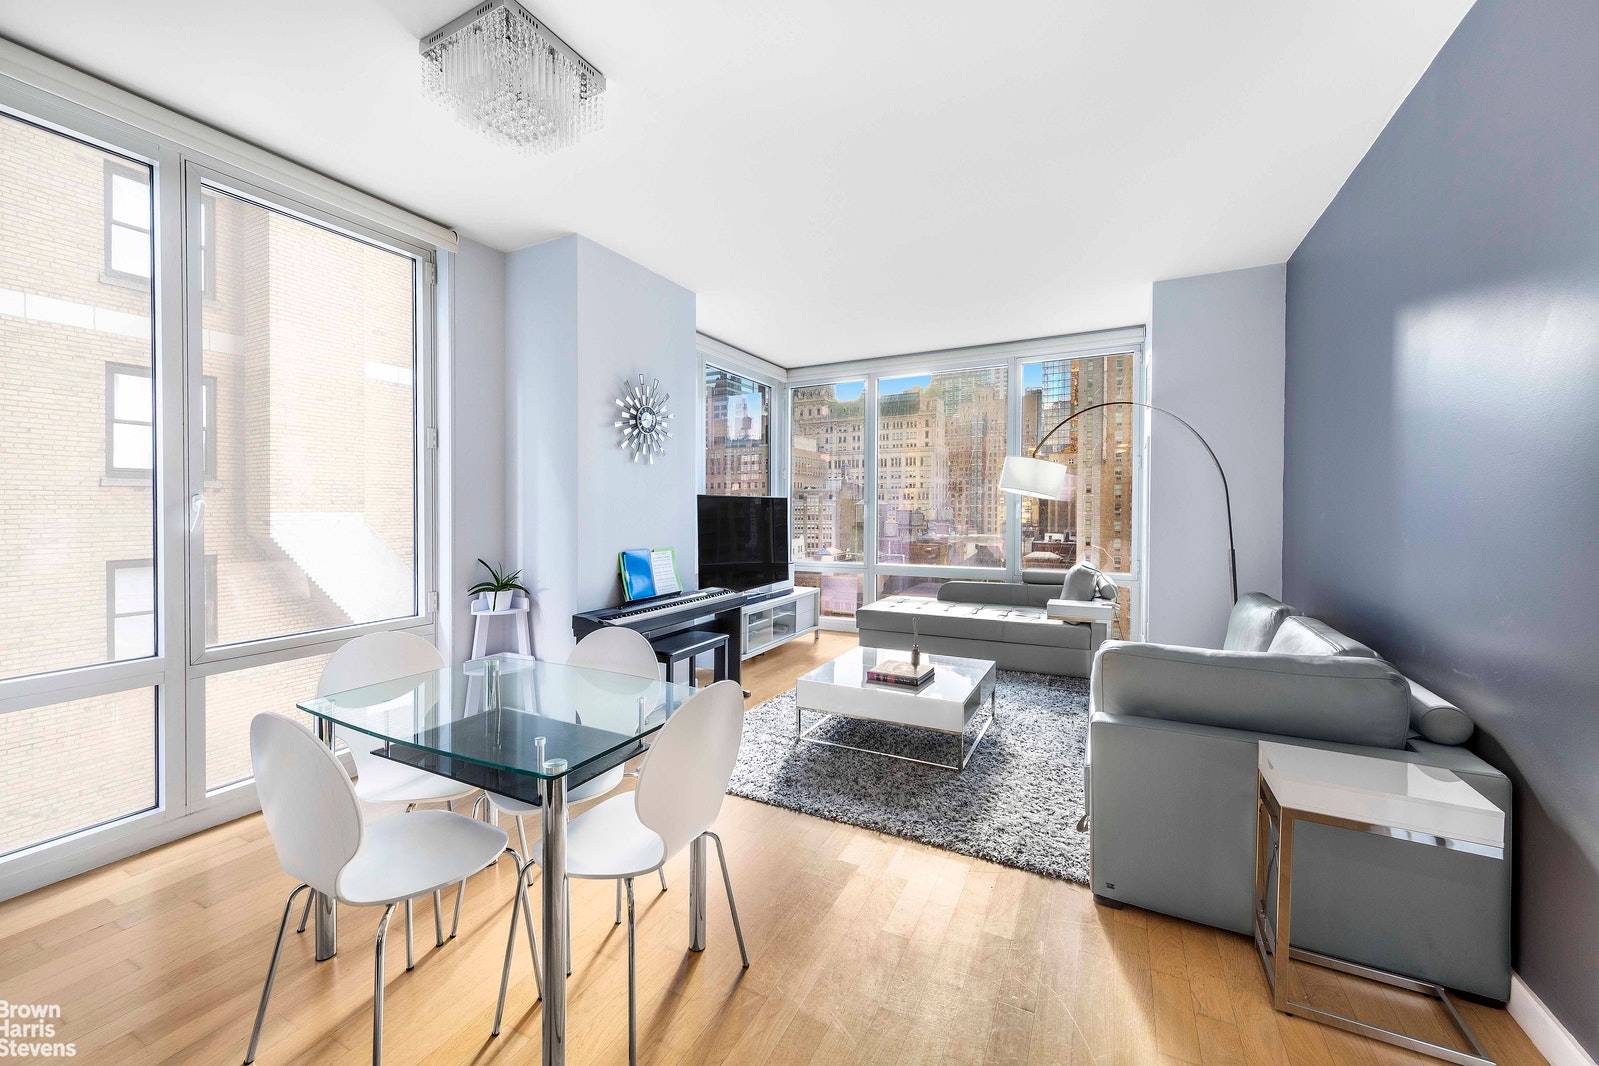 Apt. 904 is a grand south facing one bedroom unit in prime Midtown West.